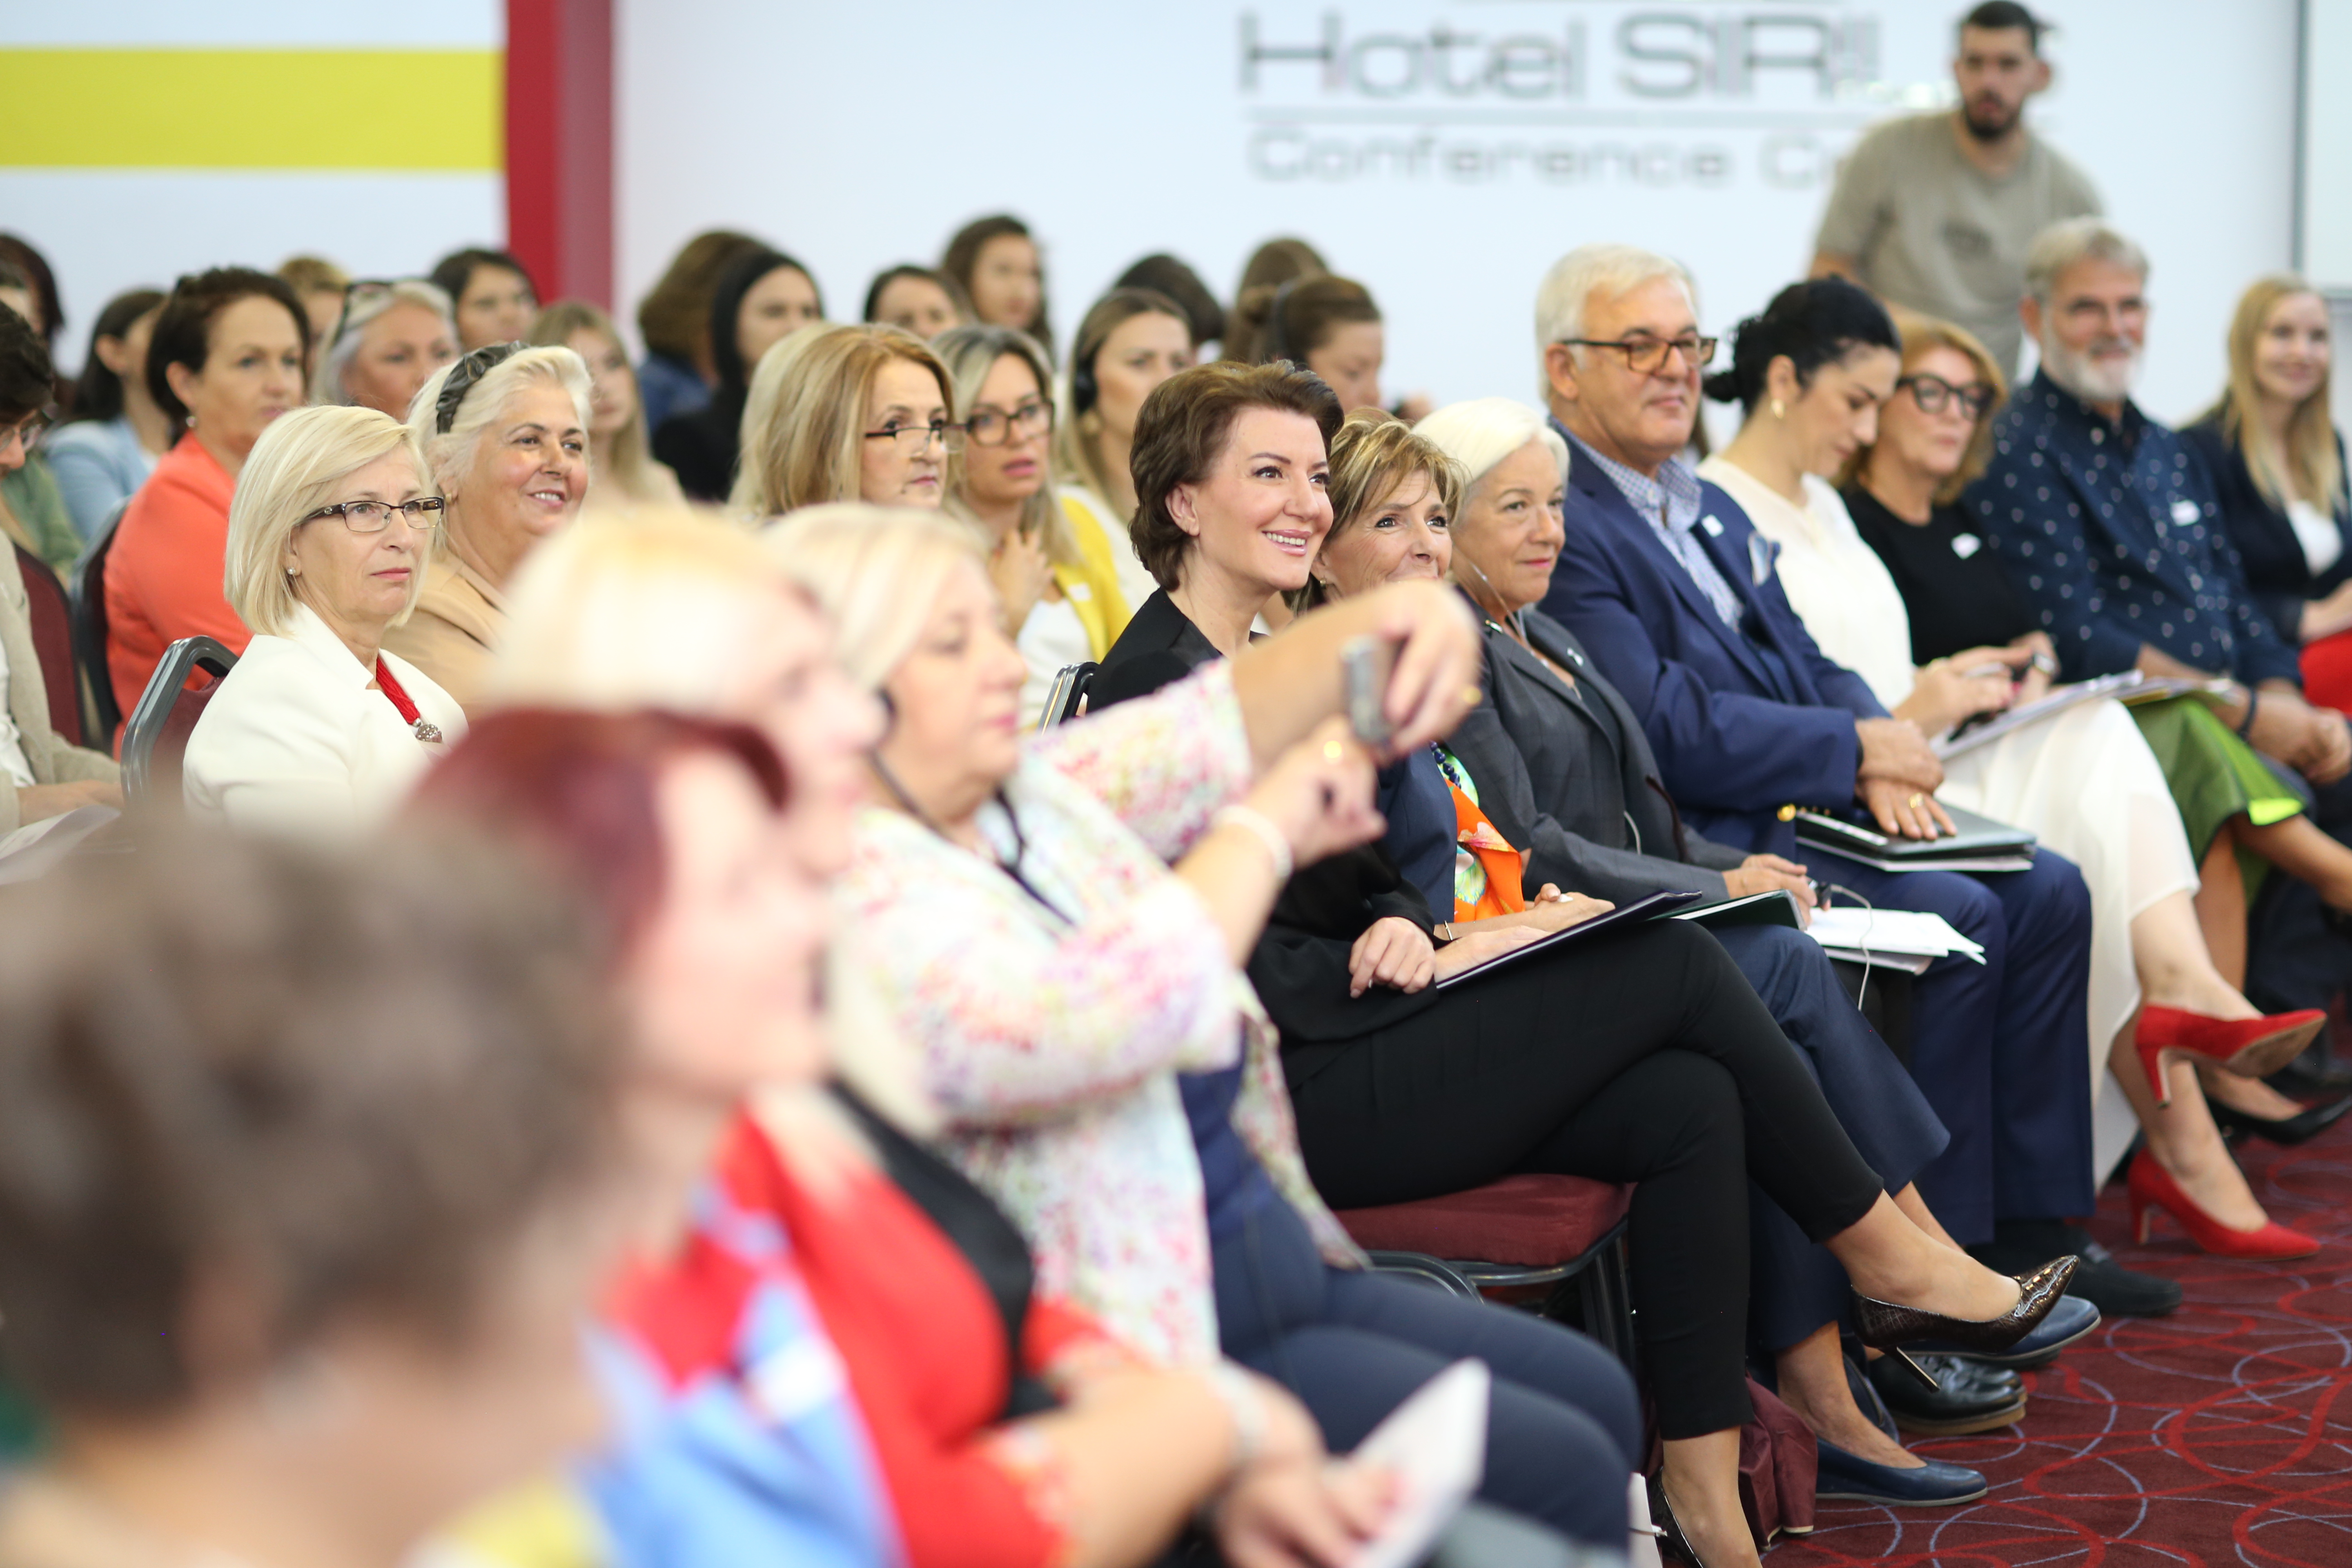 Successful women entrepreneurs from across the Western Balkans attended the conference “I love Balkan”. Photo: Courtesy of NGO Lady.